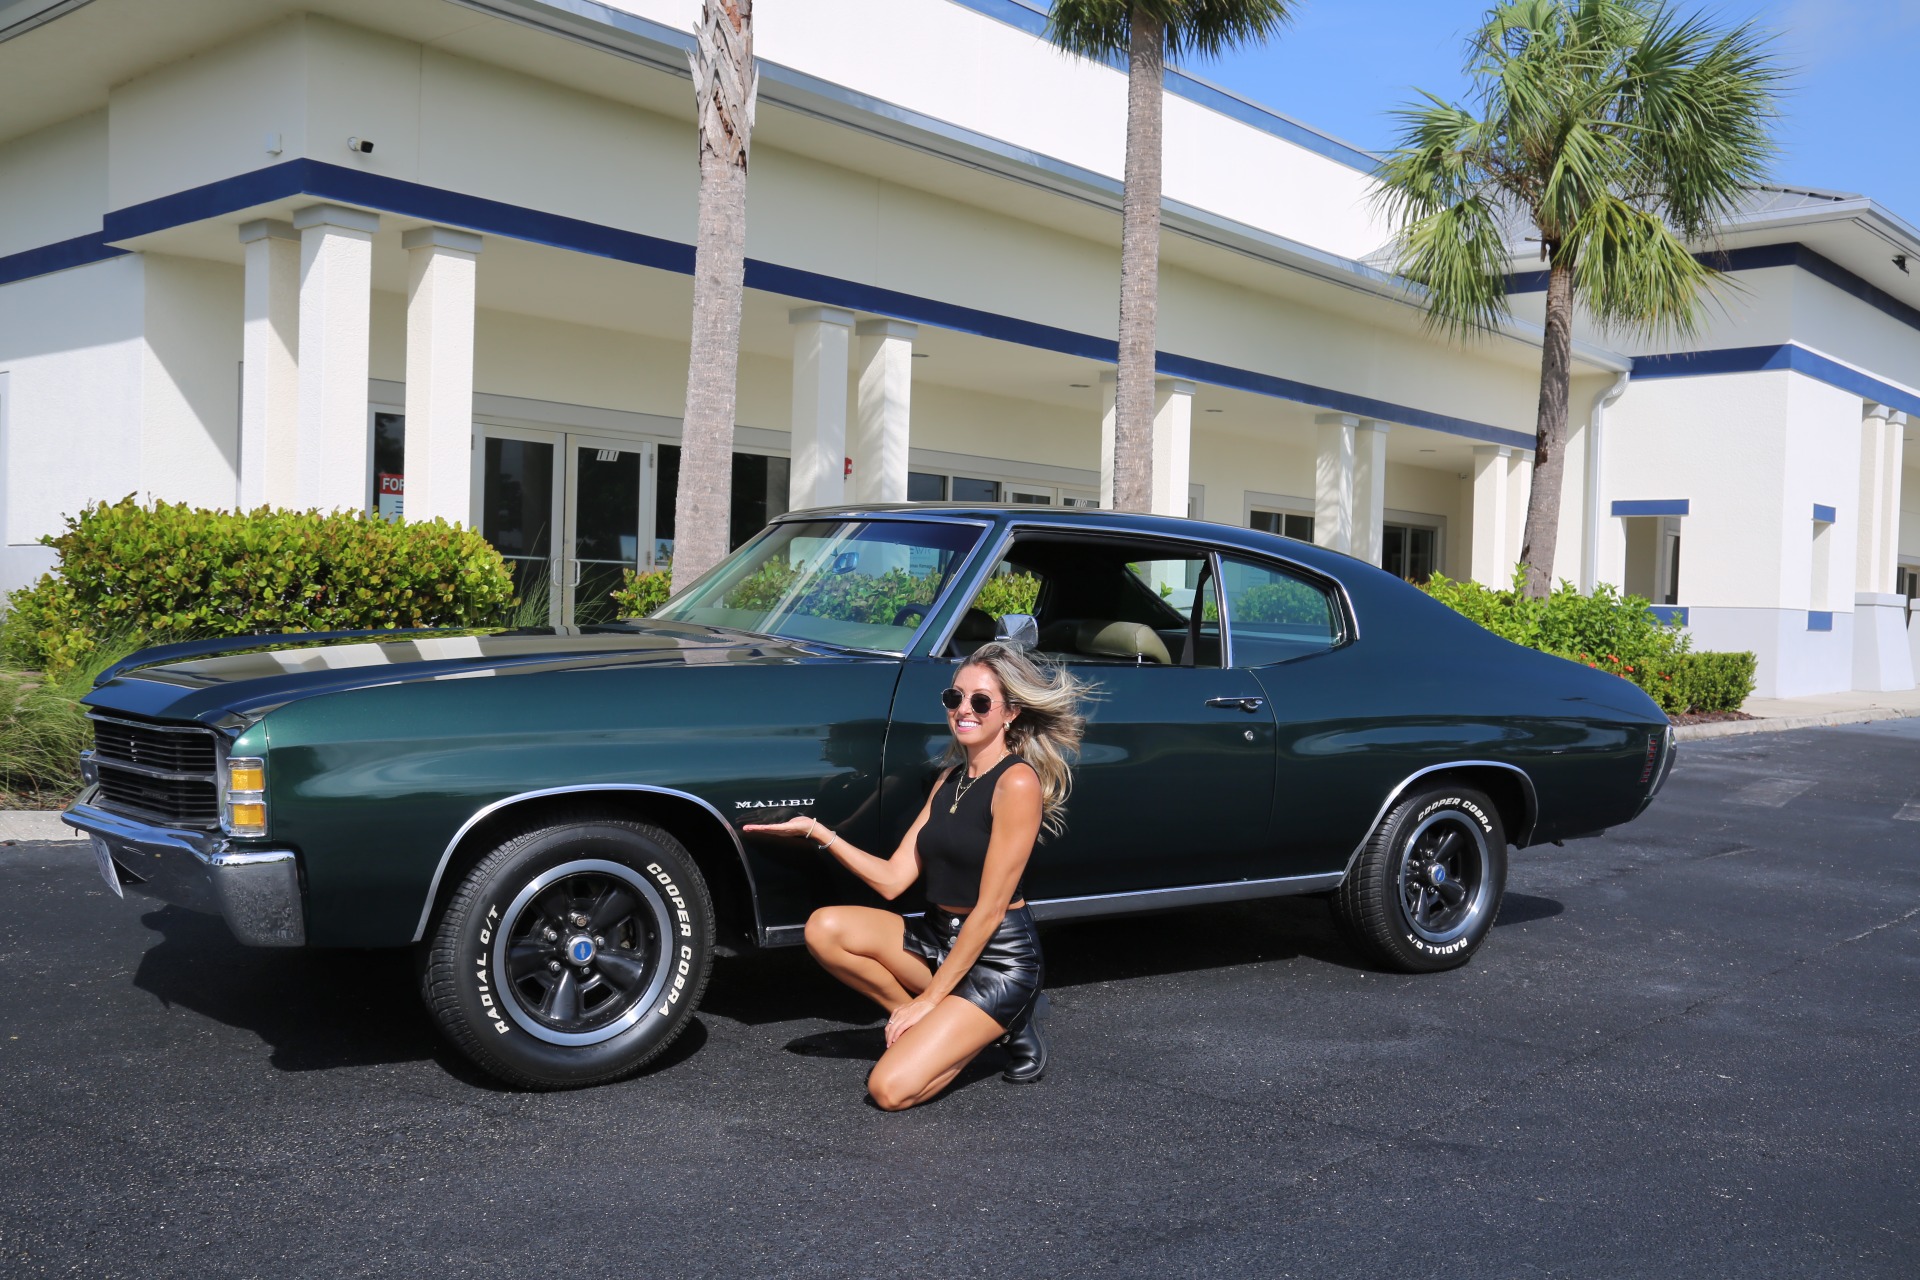 Used 1971 Chevrolet Malibu V8 Auto for sale $28,500 at Muscle Cars for Sale Inc. in Fort Myers FL 33912 1